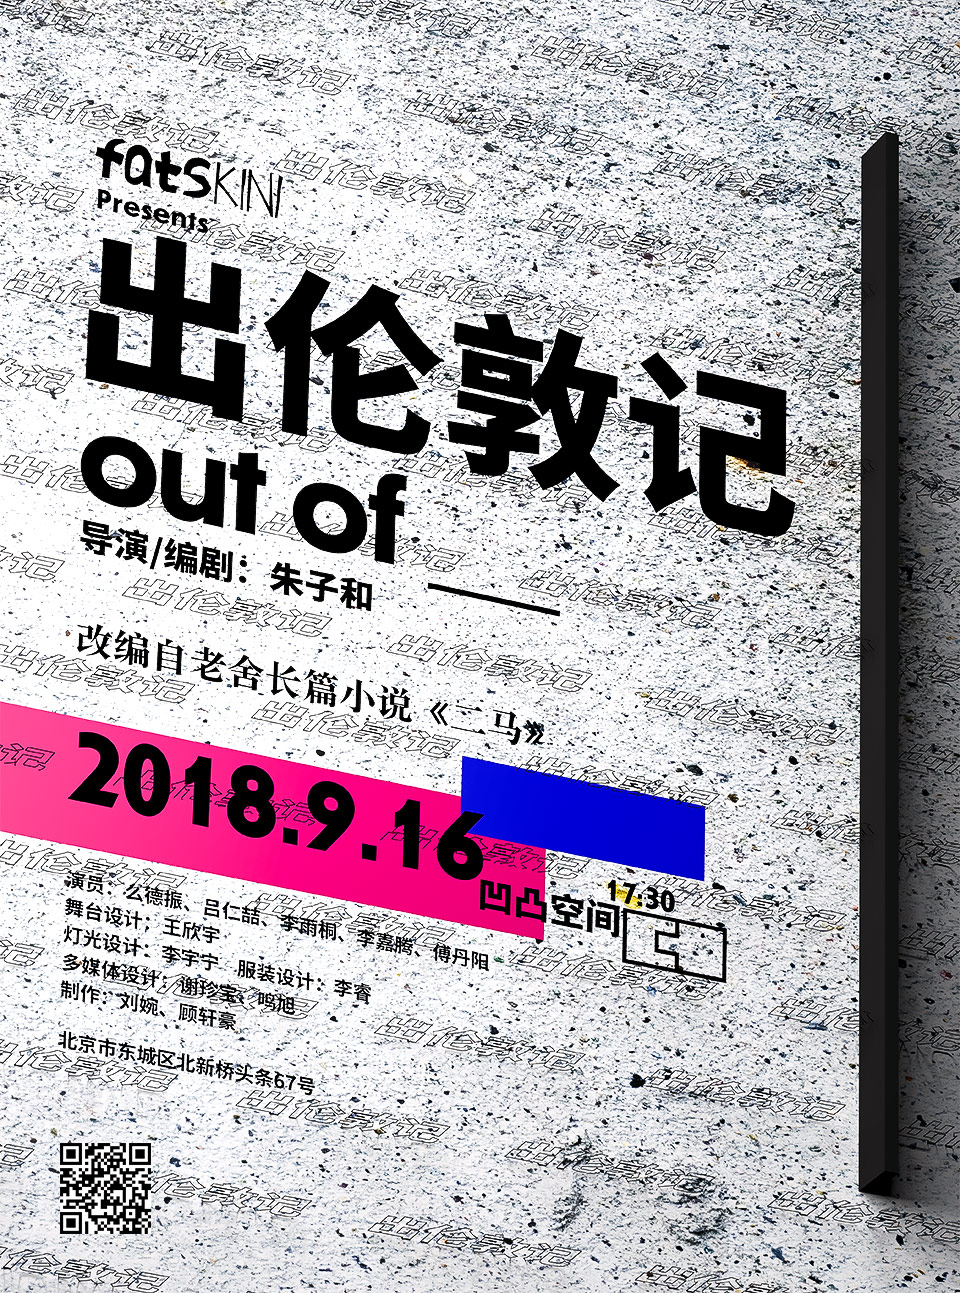 Out of __